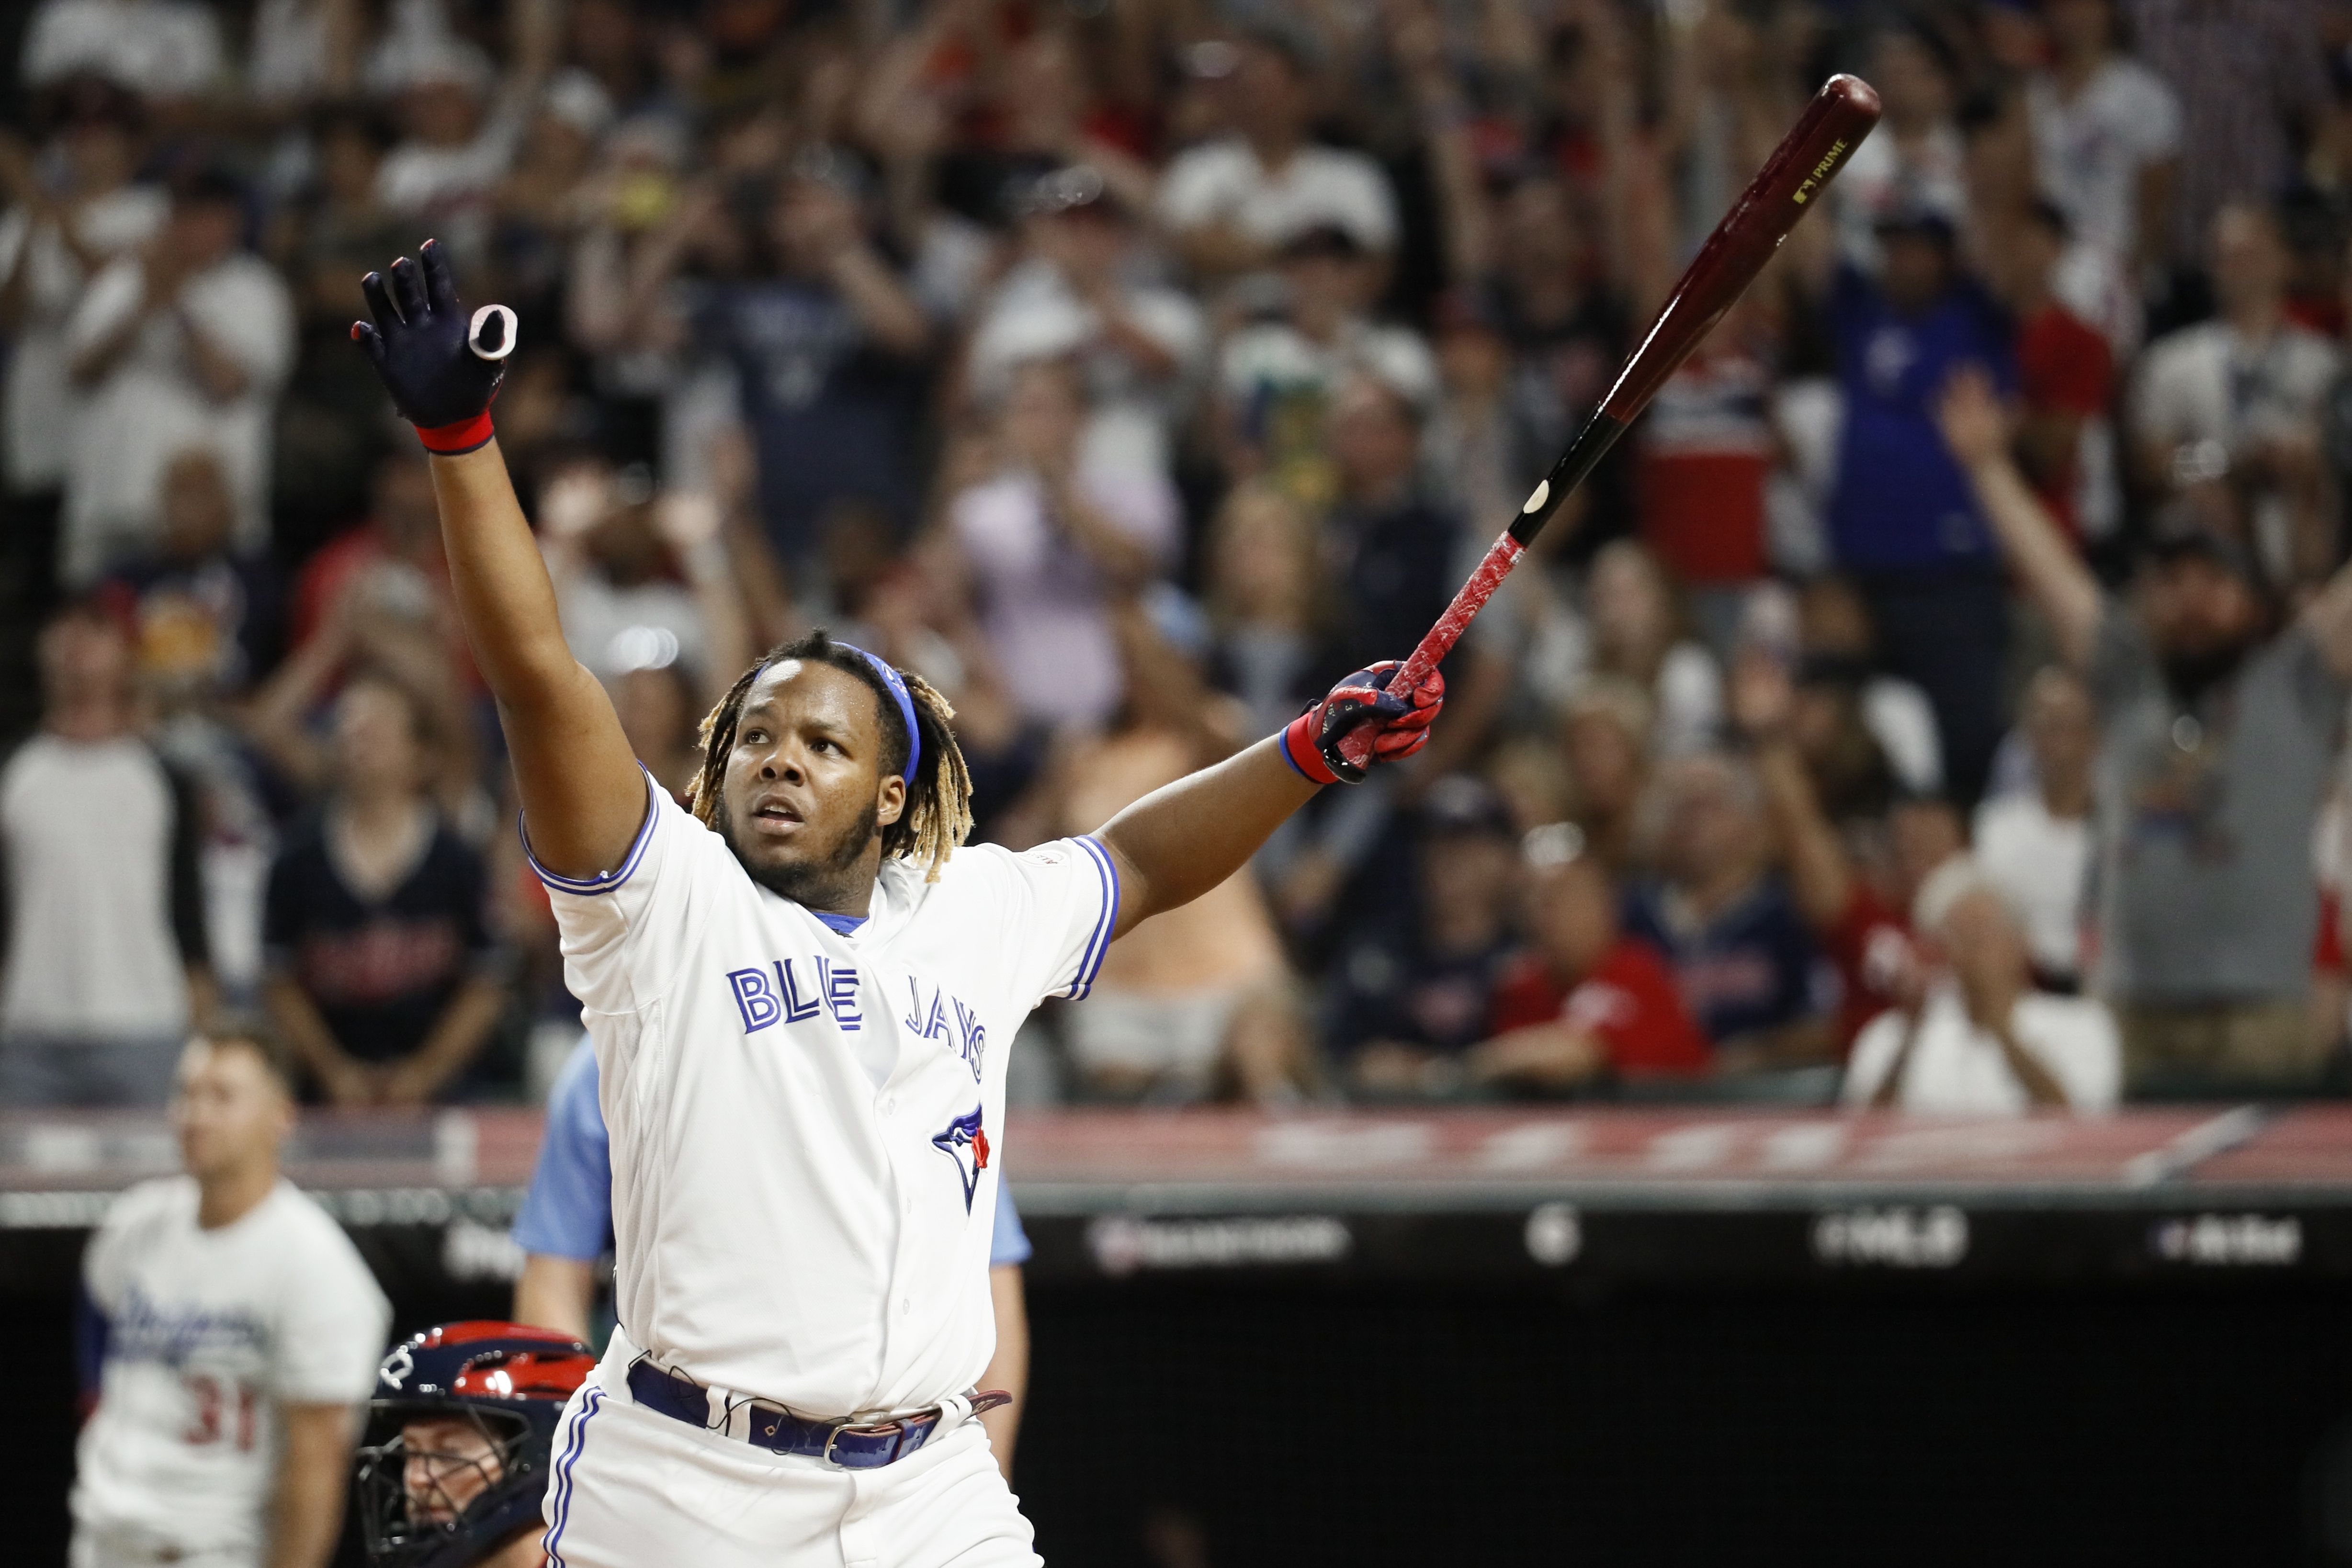 Top 9 moments from the 2019 MLB Home Run Derby at Progressive Field 